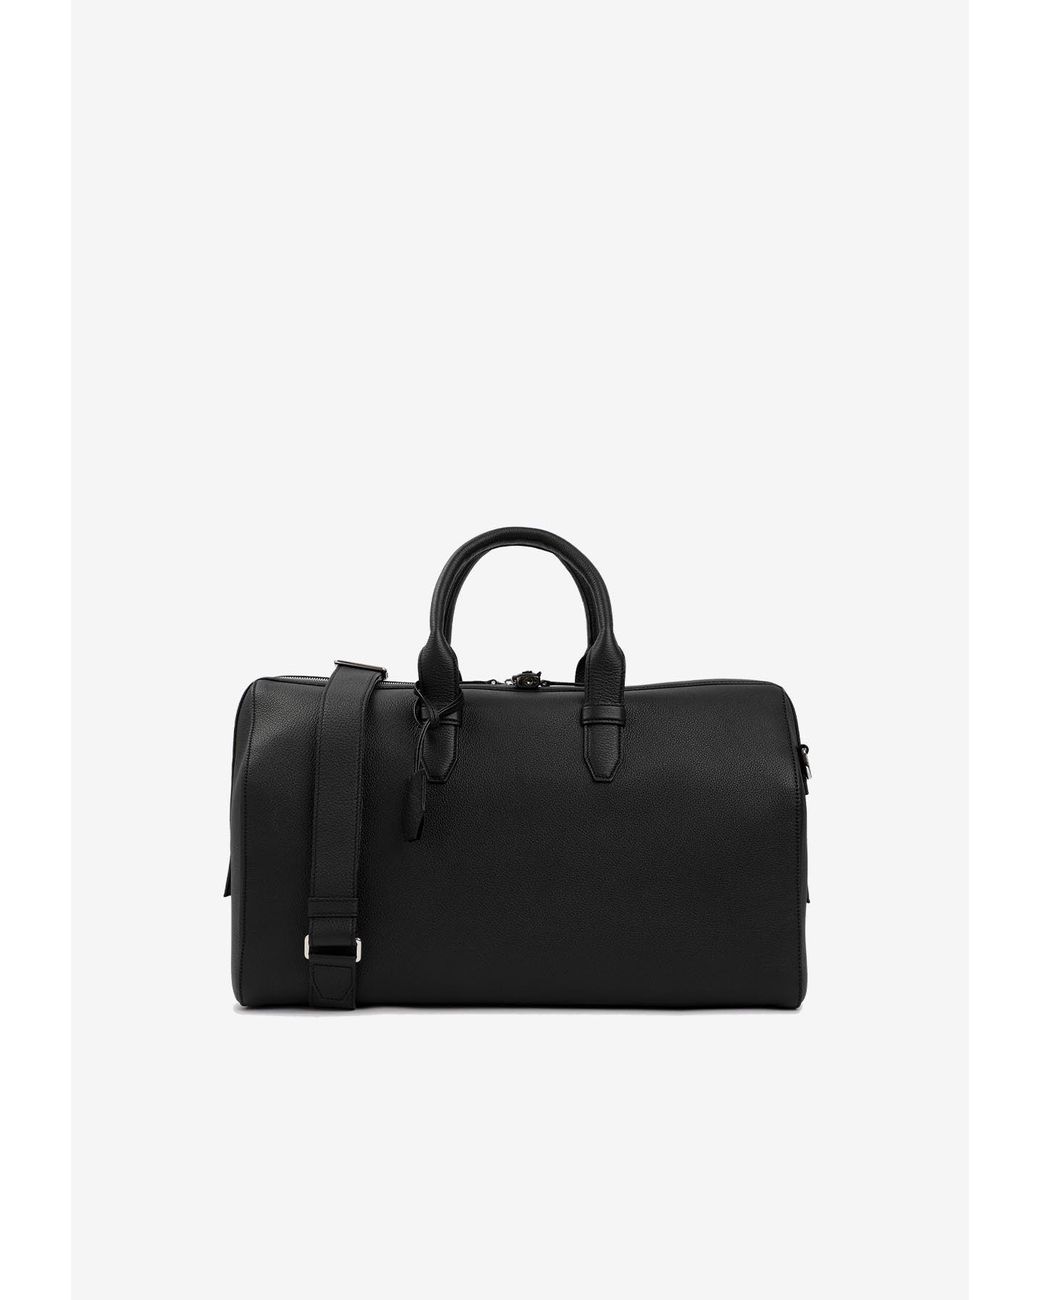 Brioni Small Duffle Bag In Grained Leather in Black for Men | Lyst